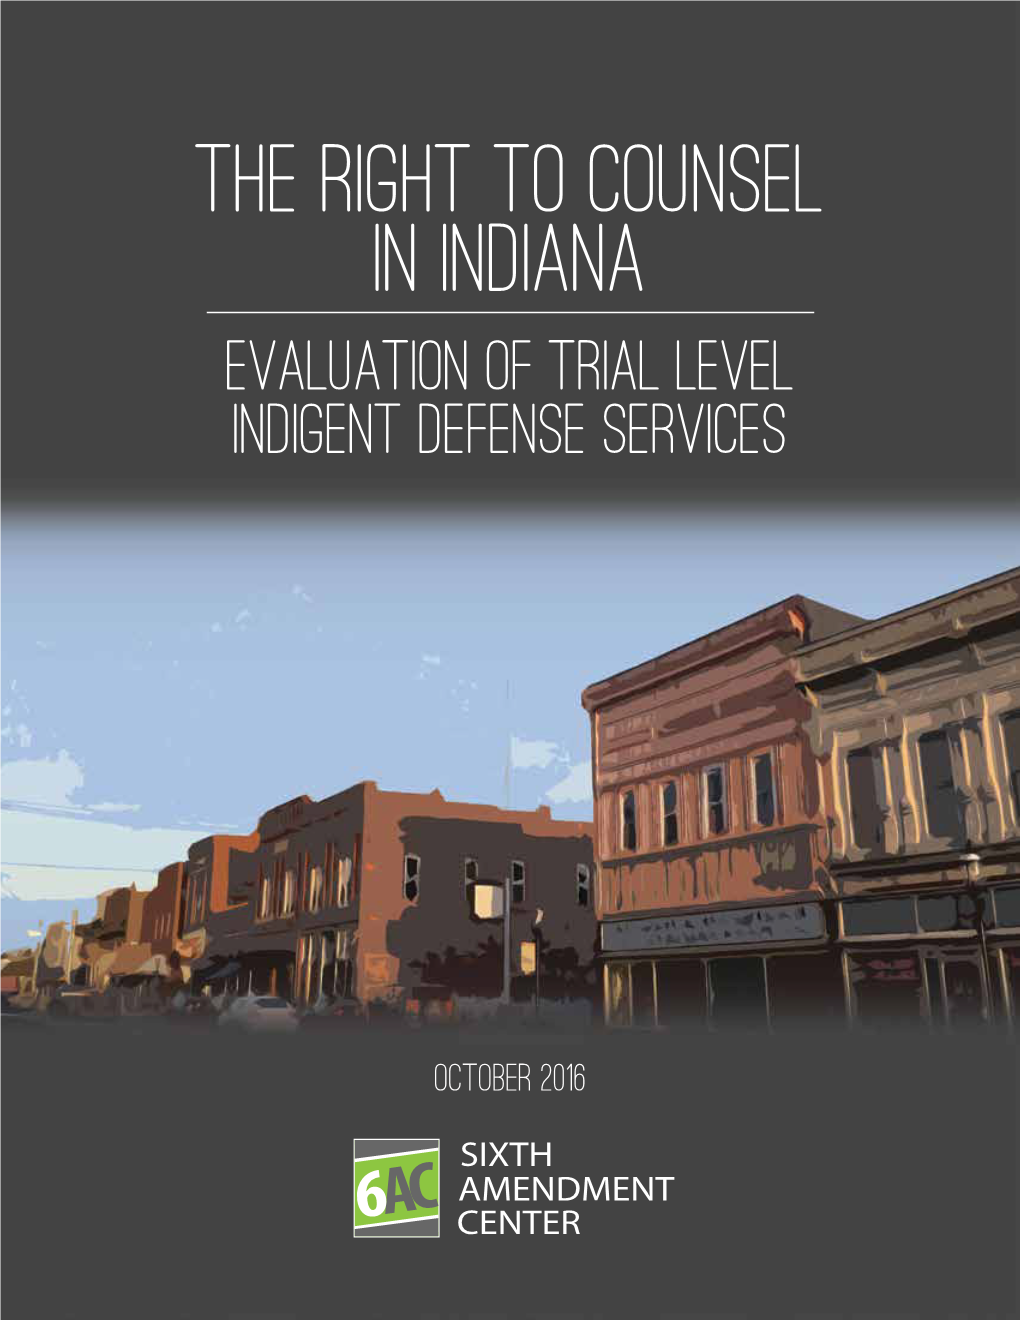 The Right to Counsel in Indiana Evaluation of Trial Level Indigent Defense Services